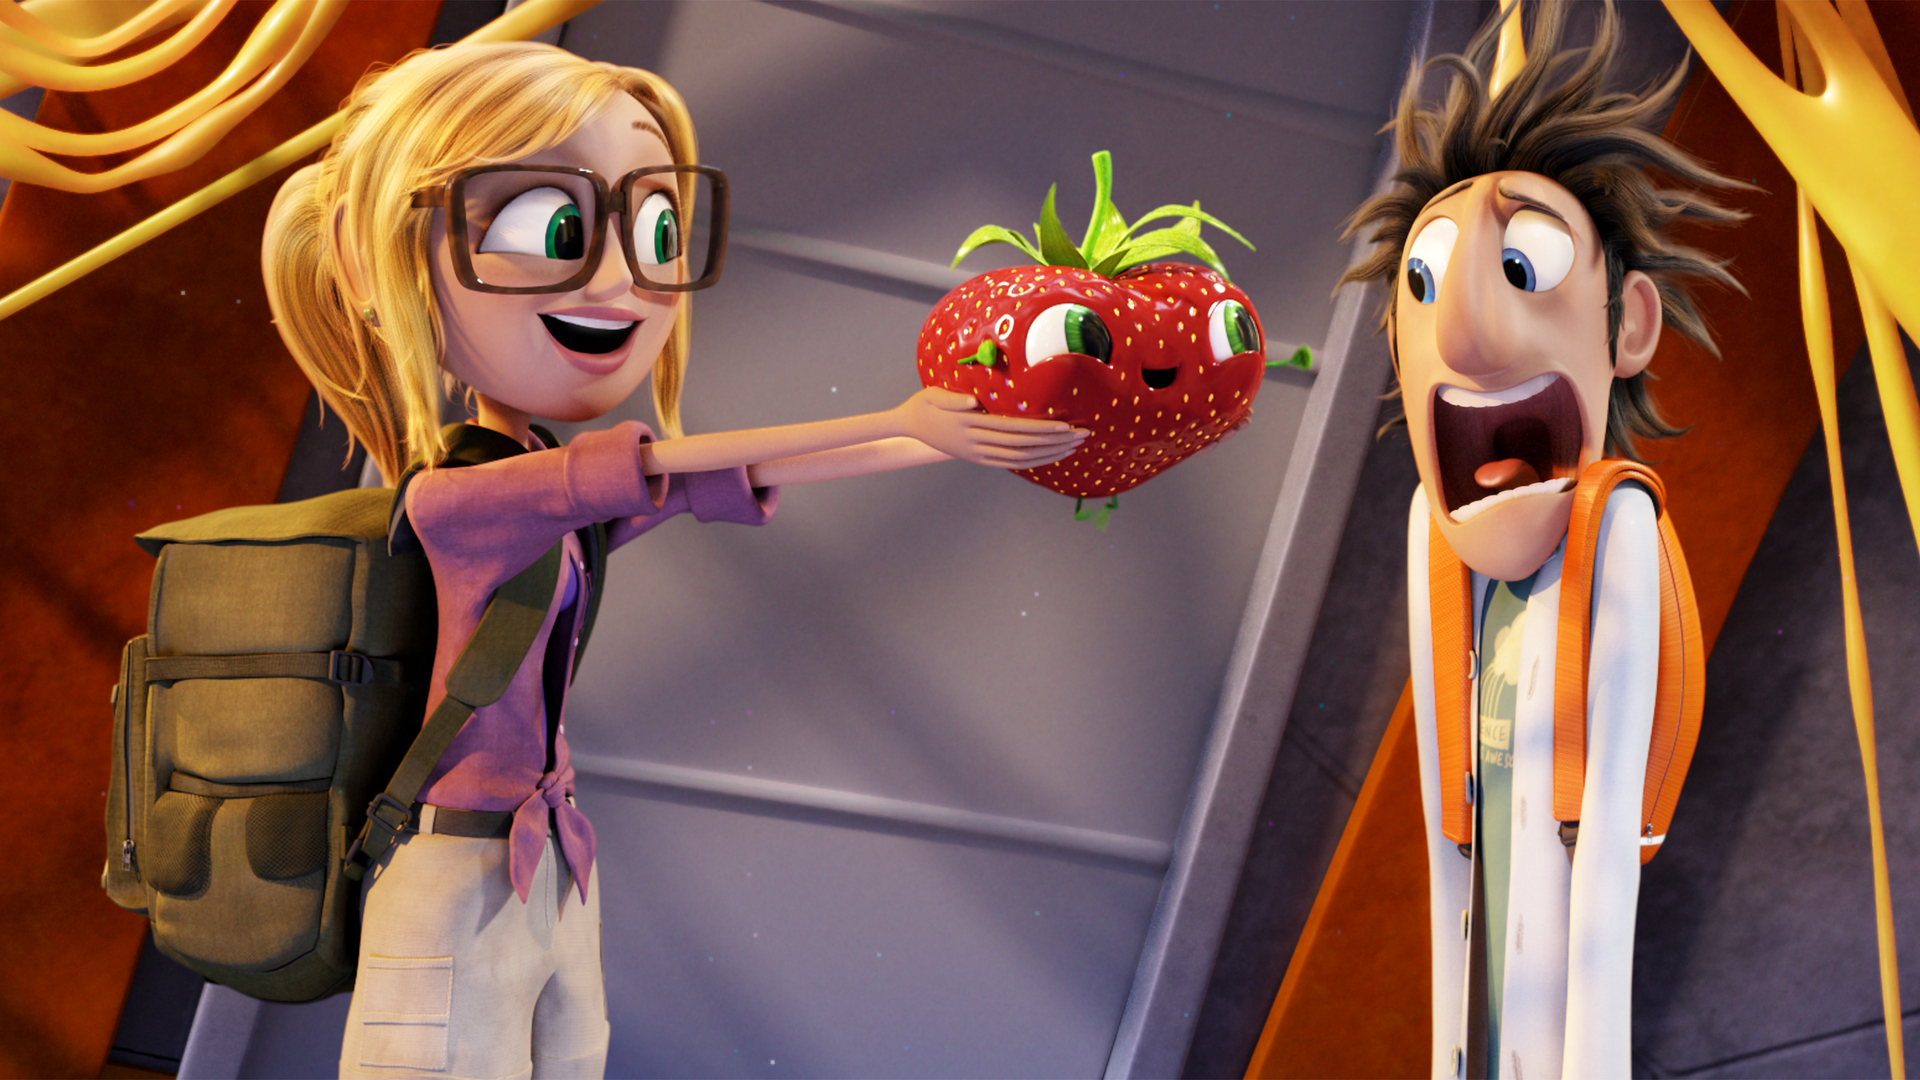 Cloudy With A Chance Of Meatballs 2 Movie Flint Lockwood Sam Sparks 1920x1080